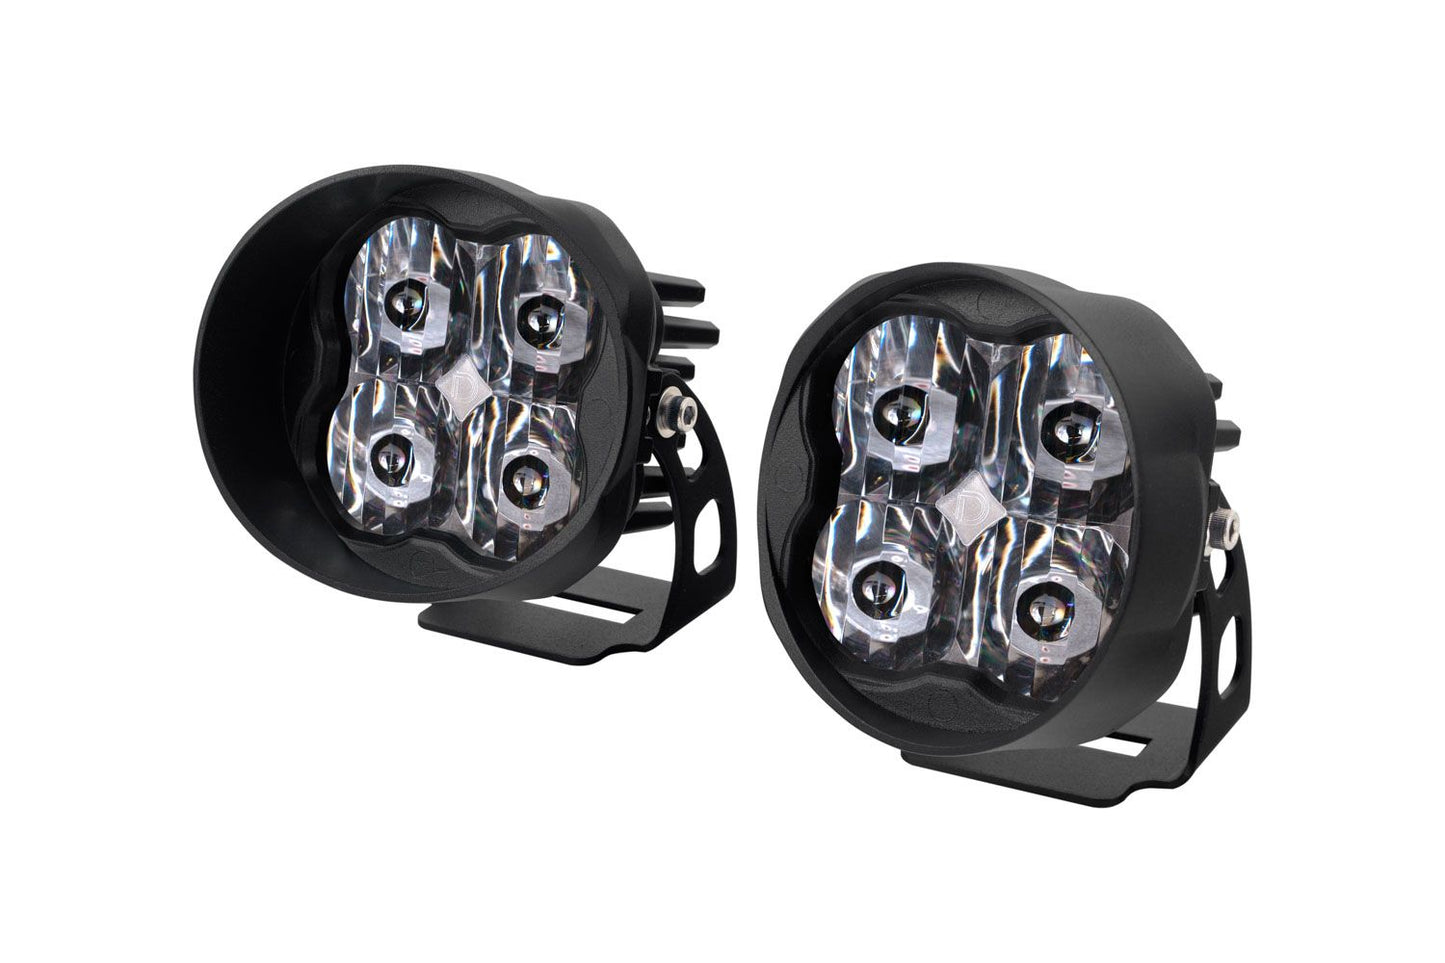 Copy of Diode Dynamics - Stage Series 3" SAE/DOT White Angled LED Pod (pair)